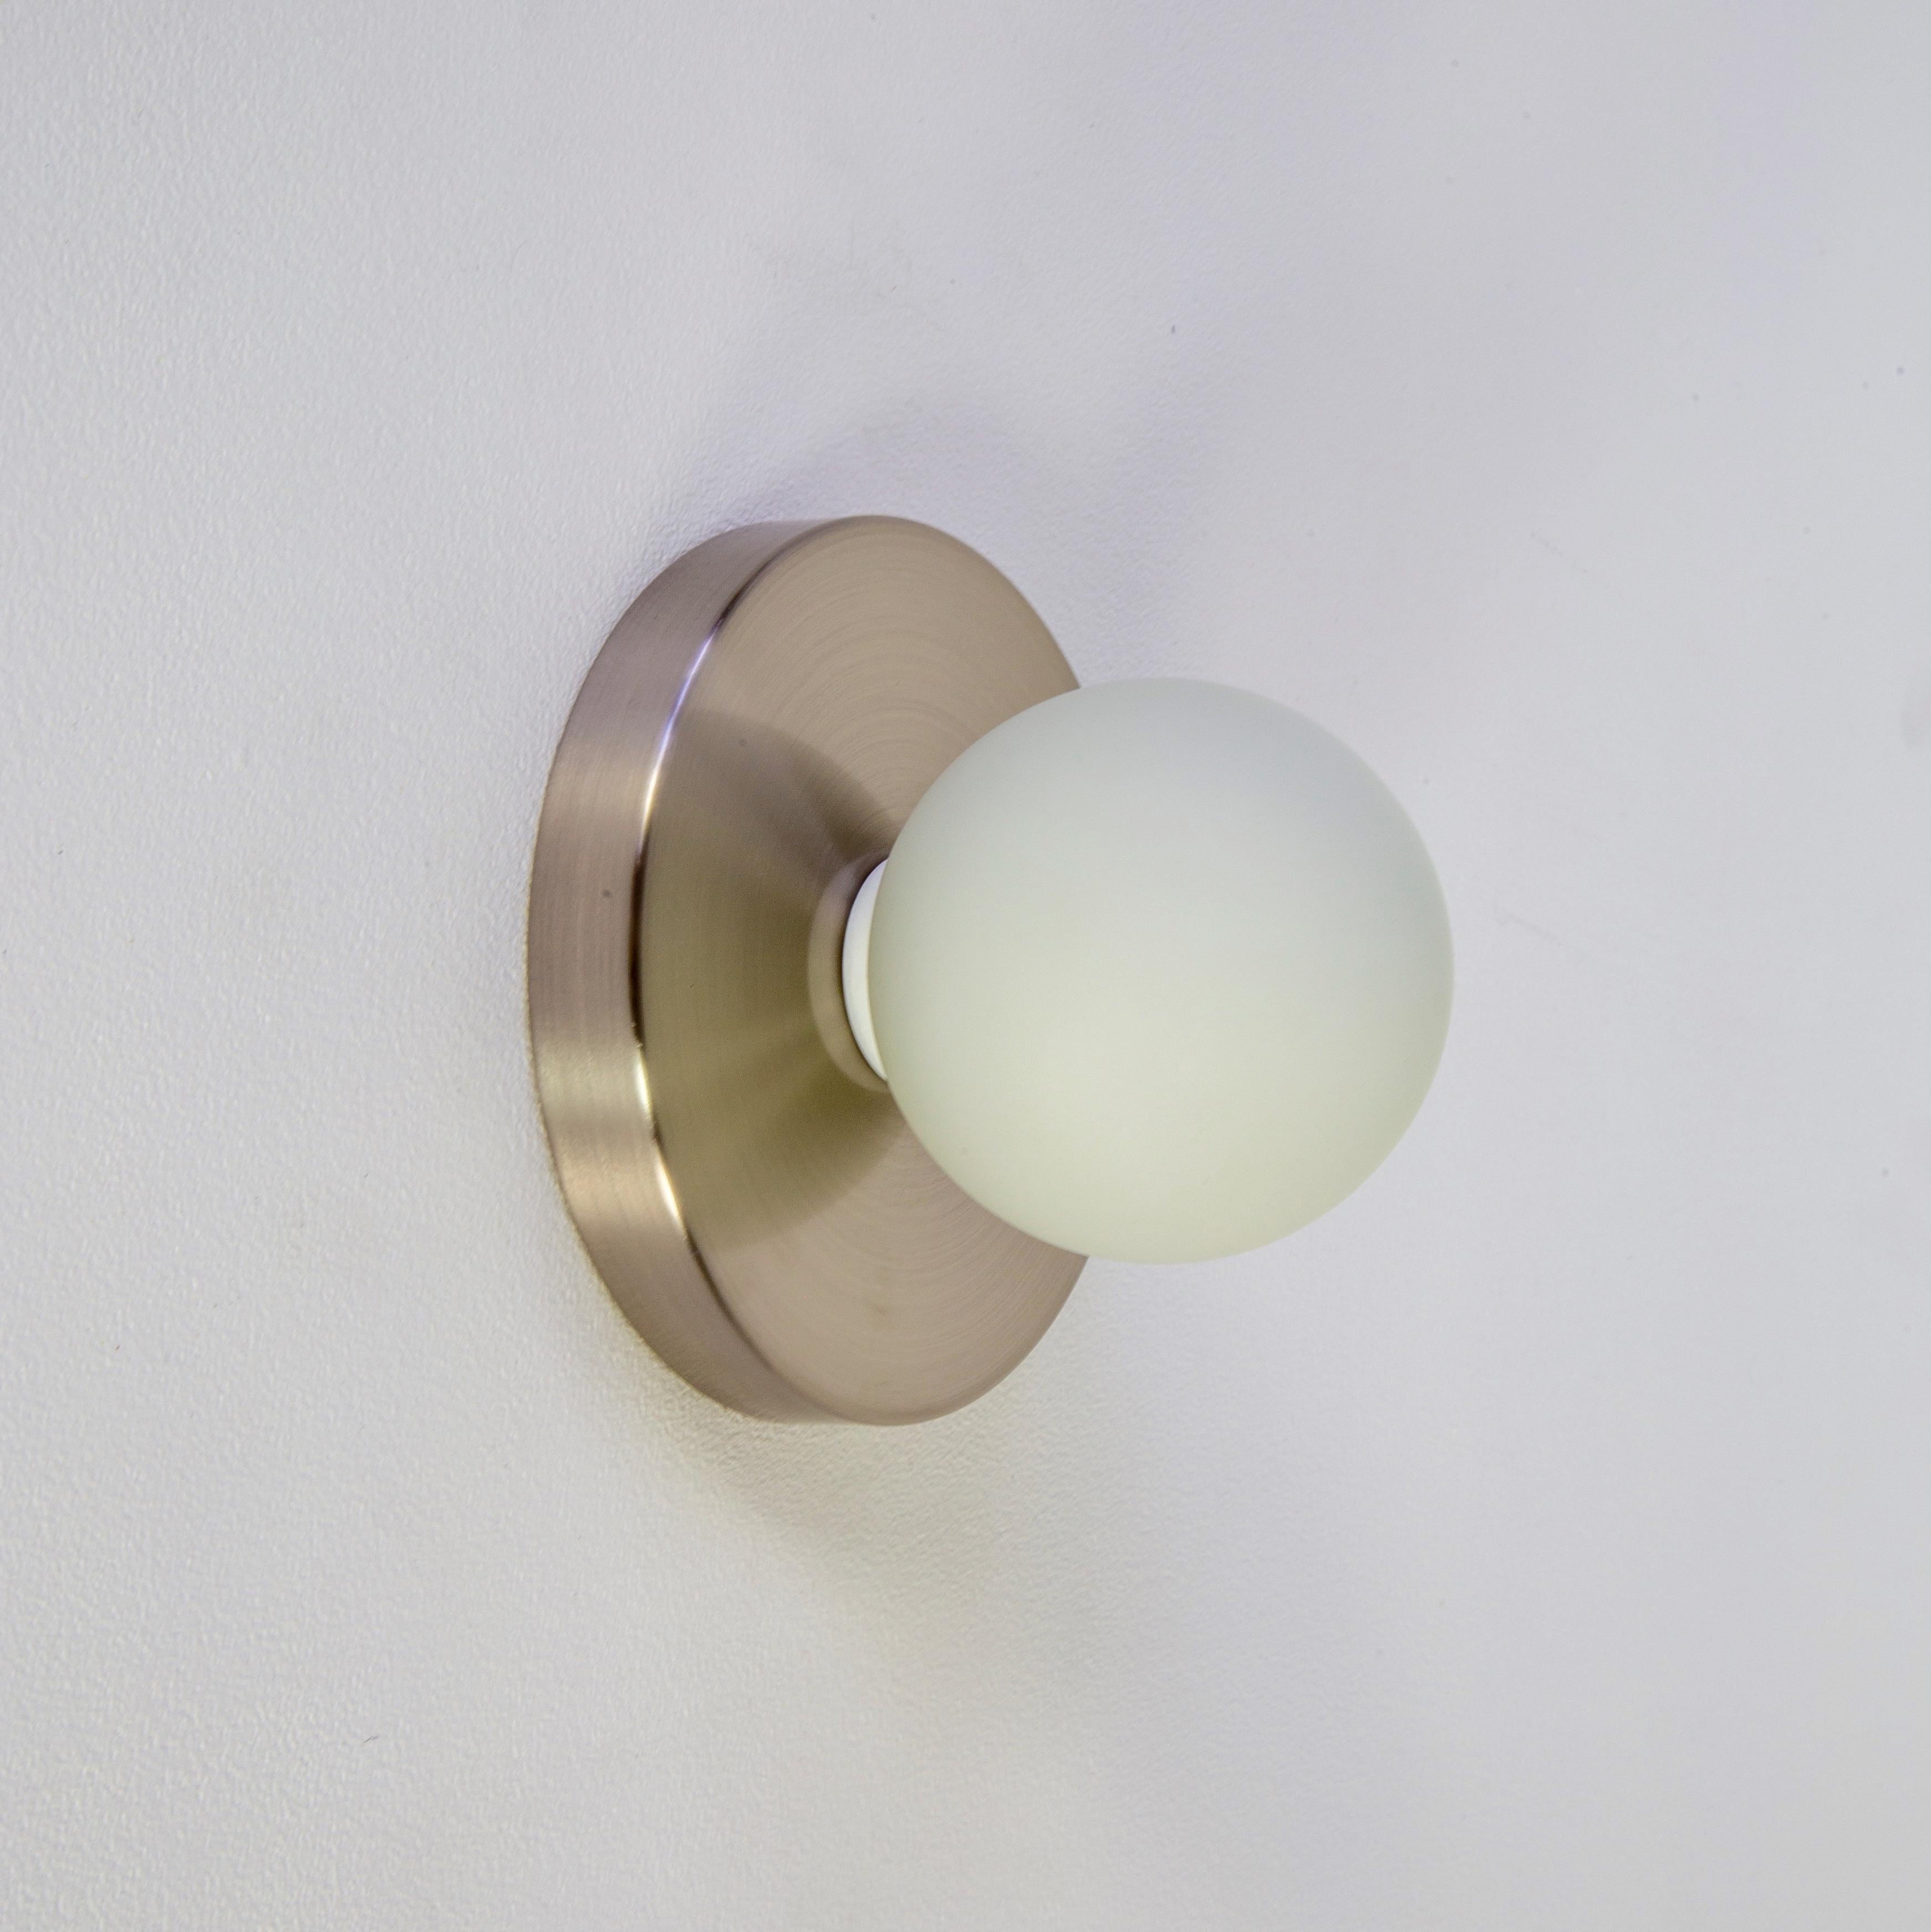 Plated Globe Sconce by Research.Lighting, Brushed Nickel, Made to Order For Sale